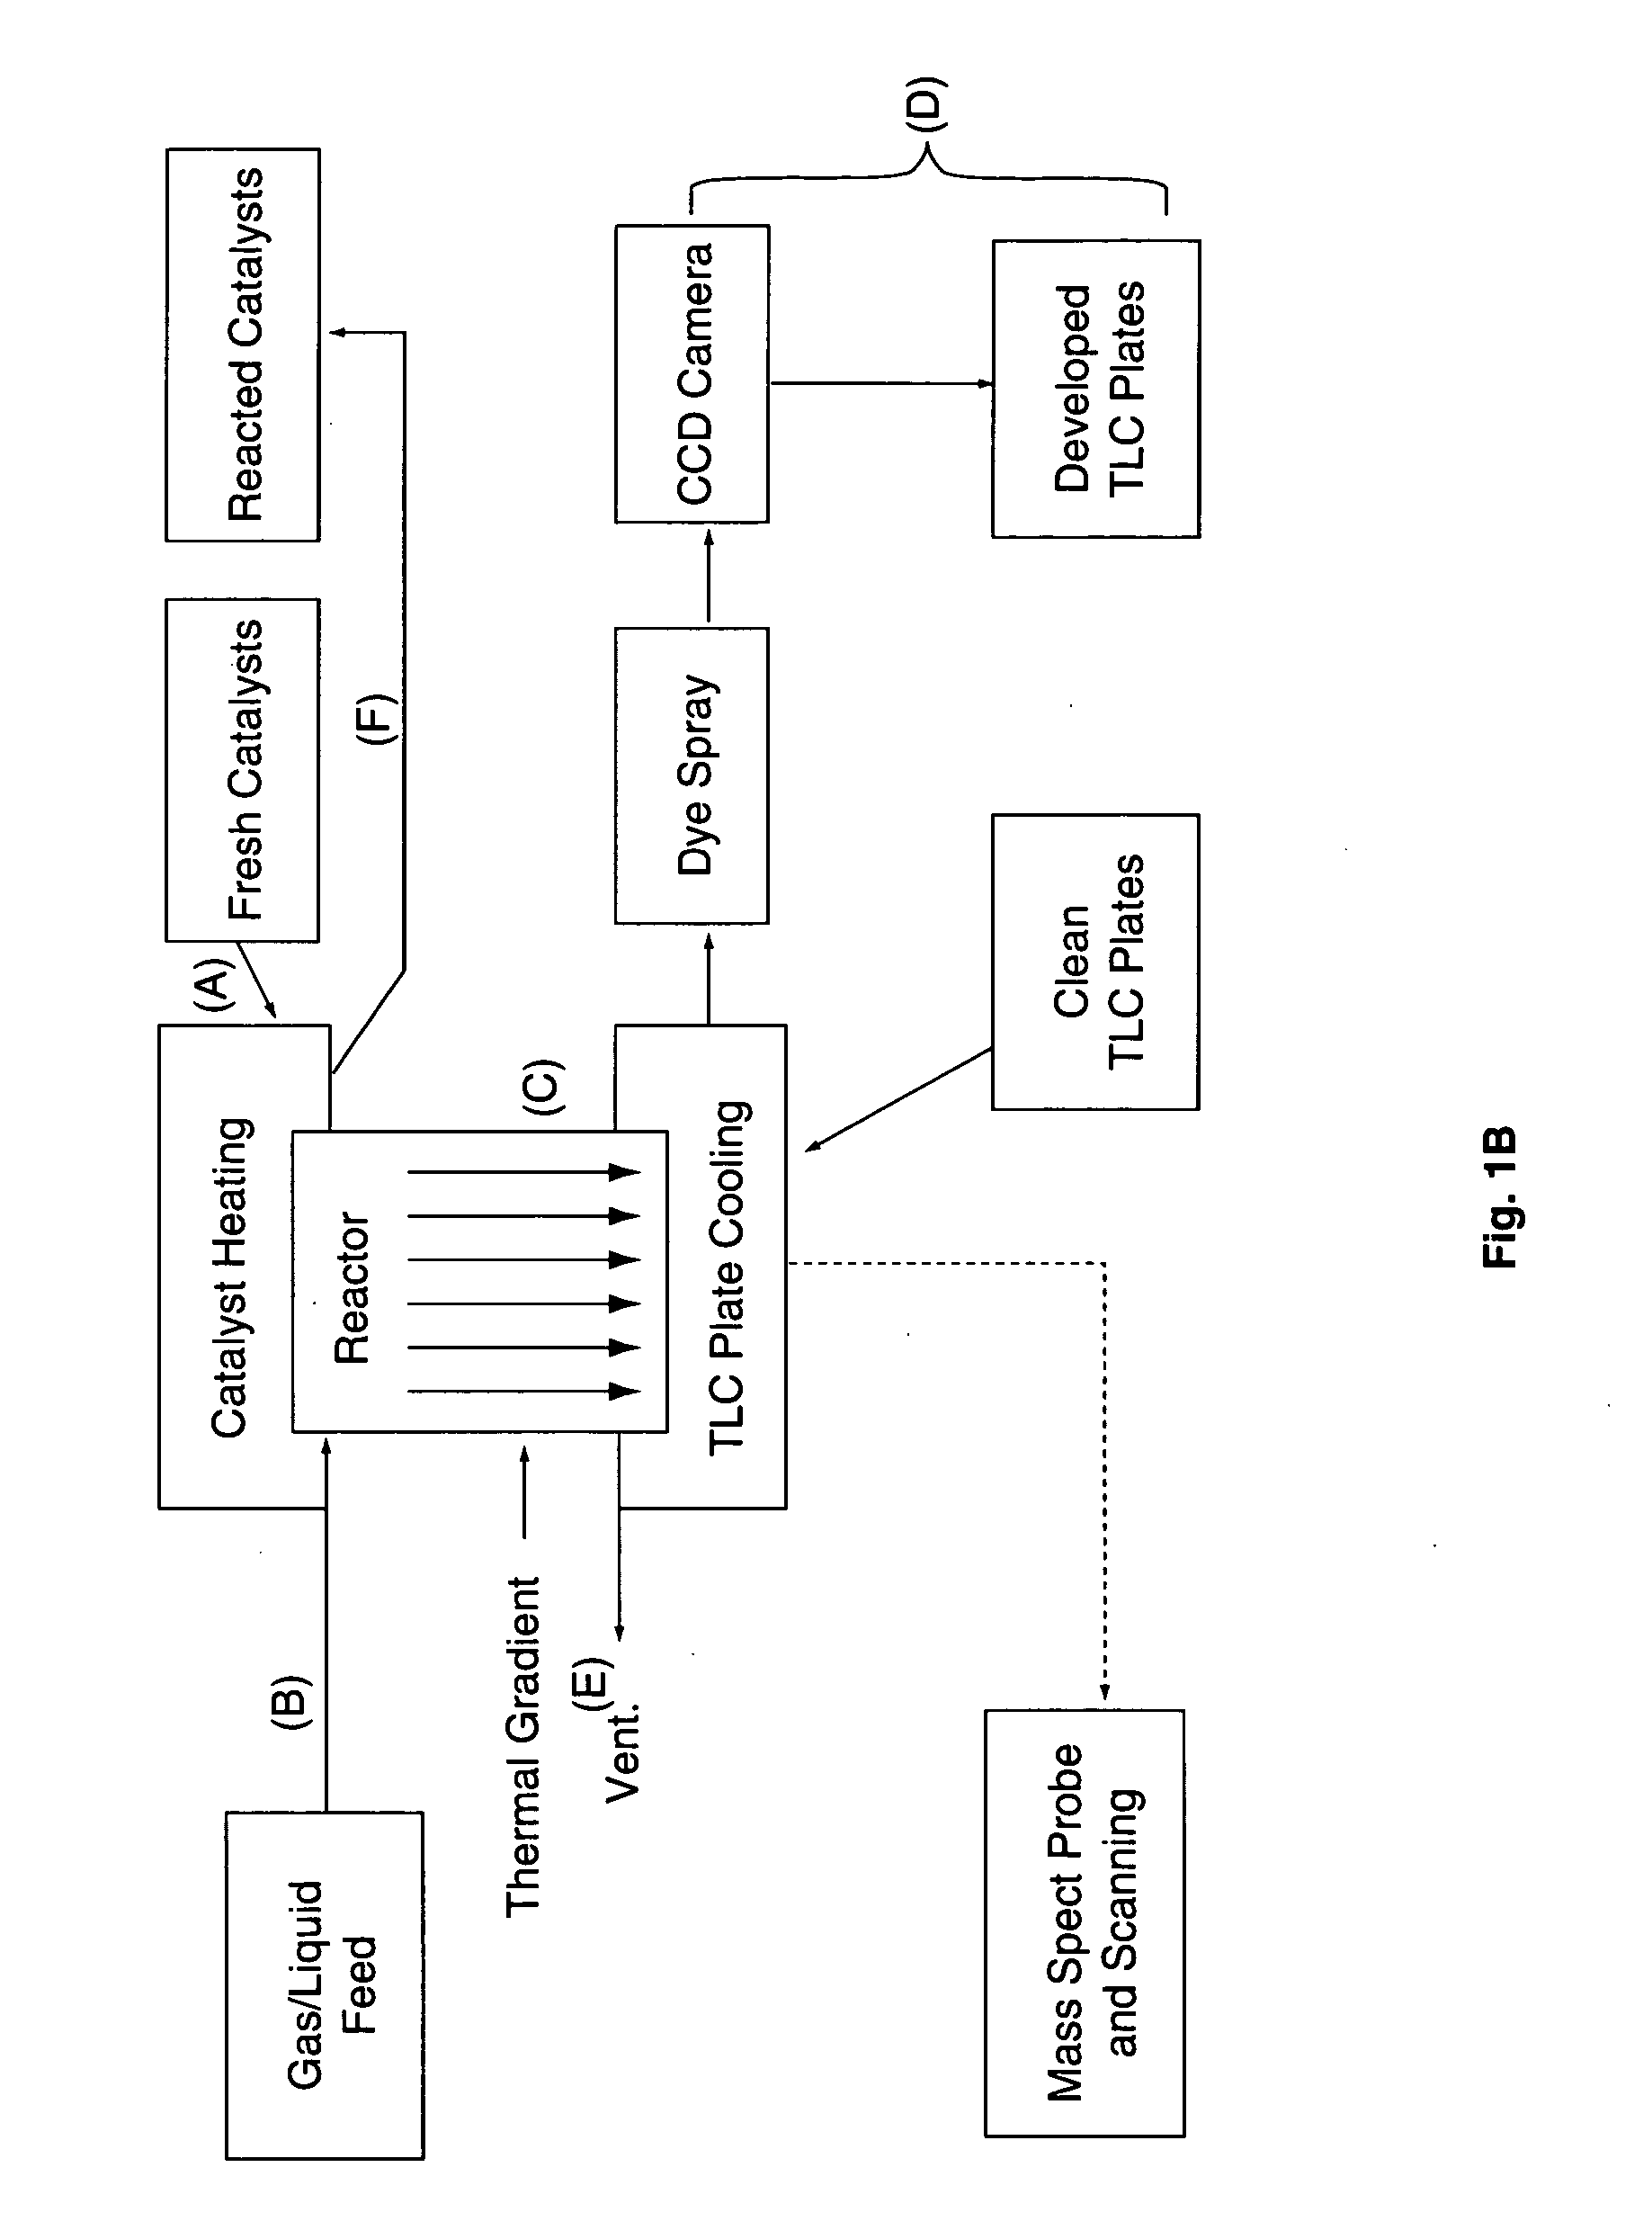 Chemical processing microsystems comprising high-temperature parallel flow microreactors